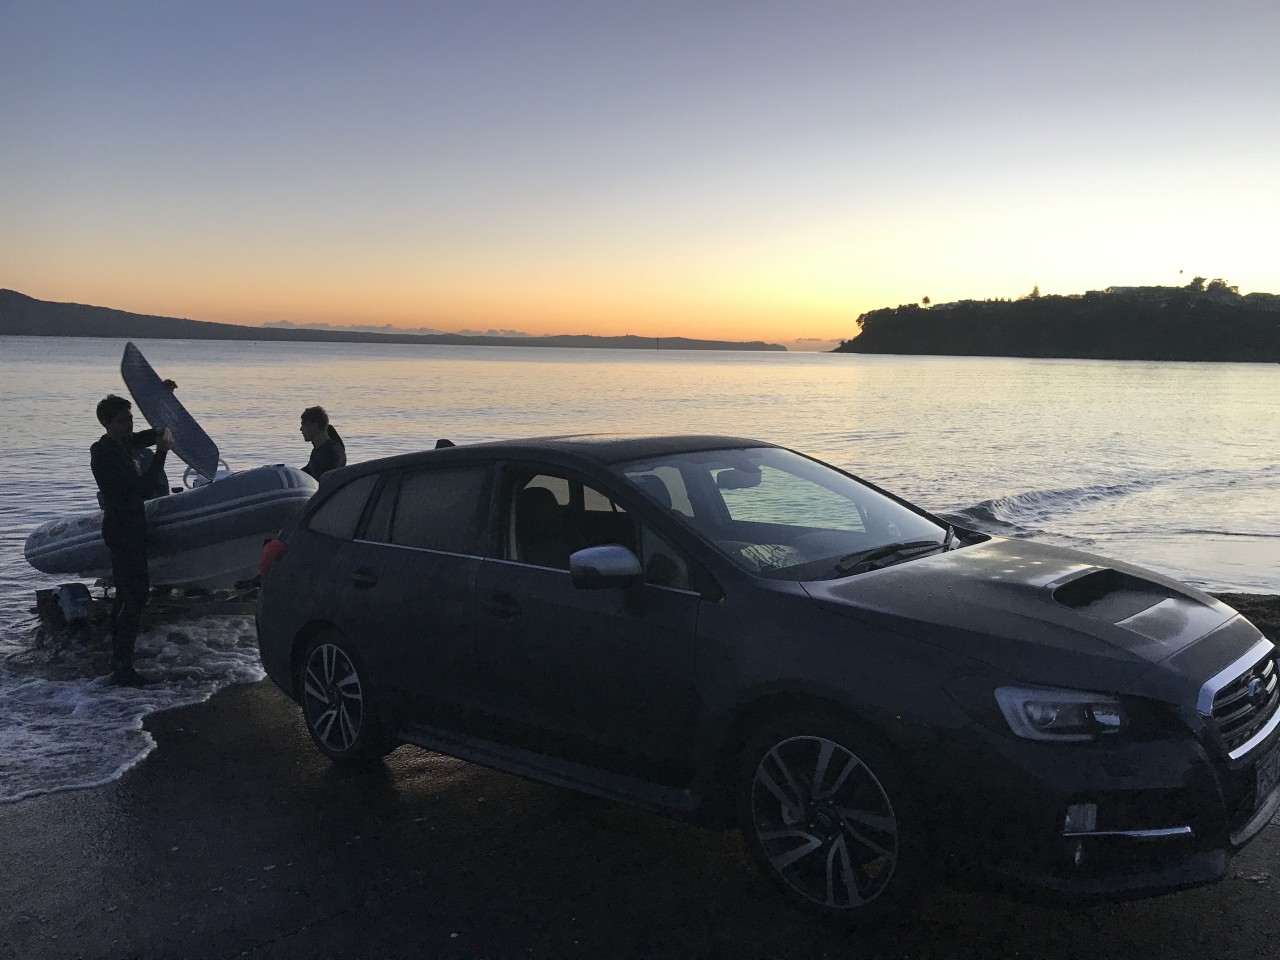 Subaru ambassador Art Green enjoys the versatility of the Subaru Levorg, which can drop a boat off at the beach before work, deliver him to business meetings in the city during the day and then over the Waitakere Ranges for a trail run in the evening. 